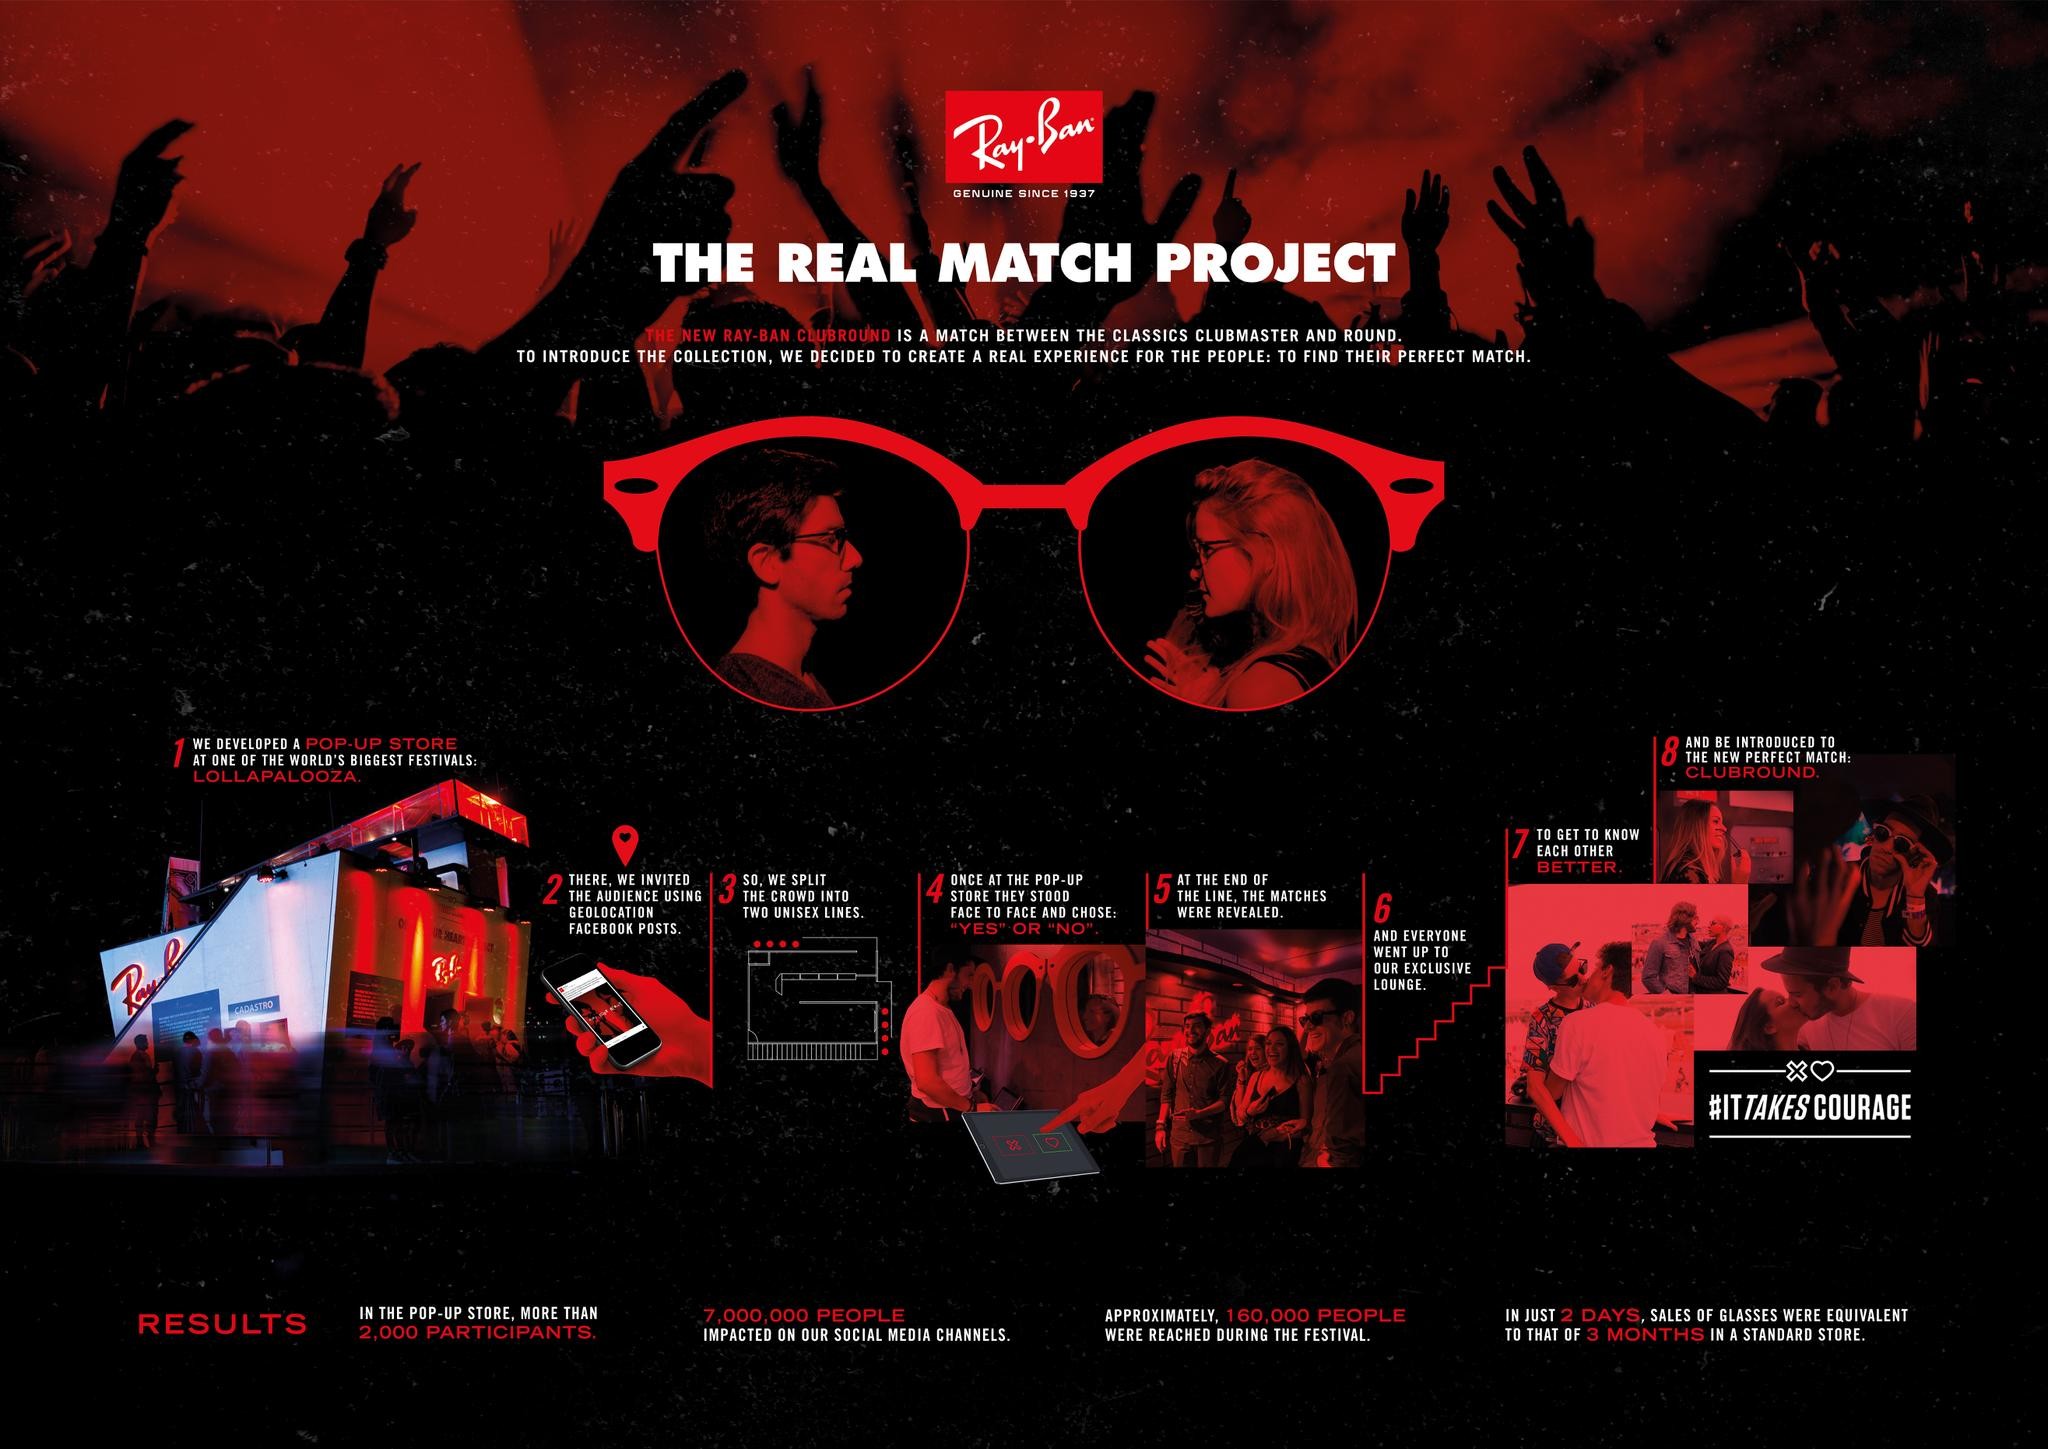 The Real Match Project